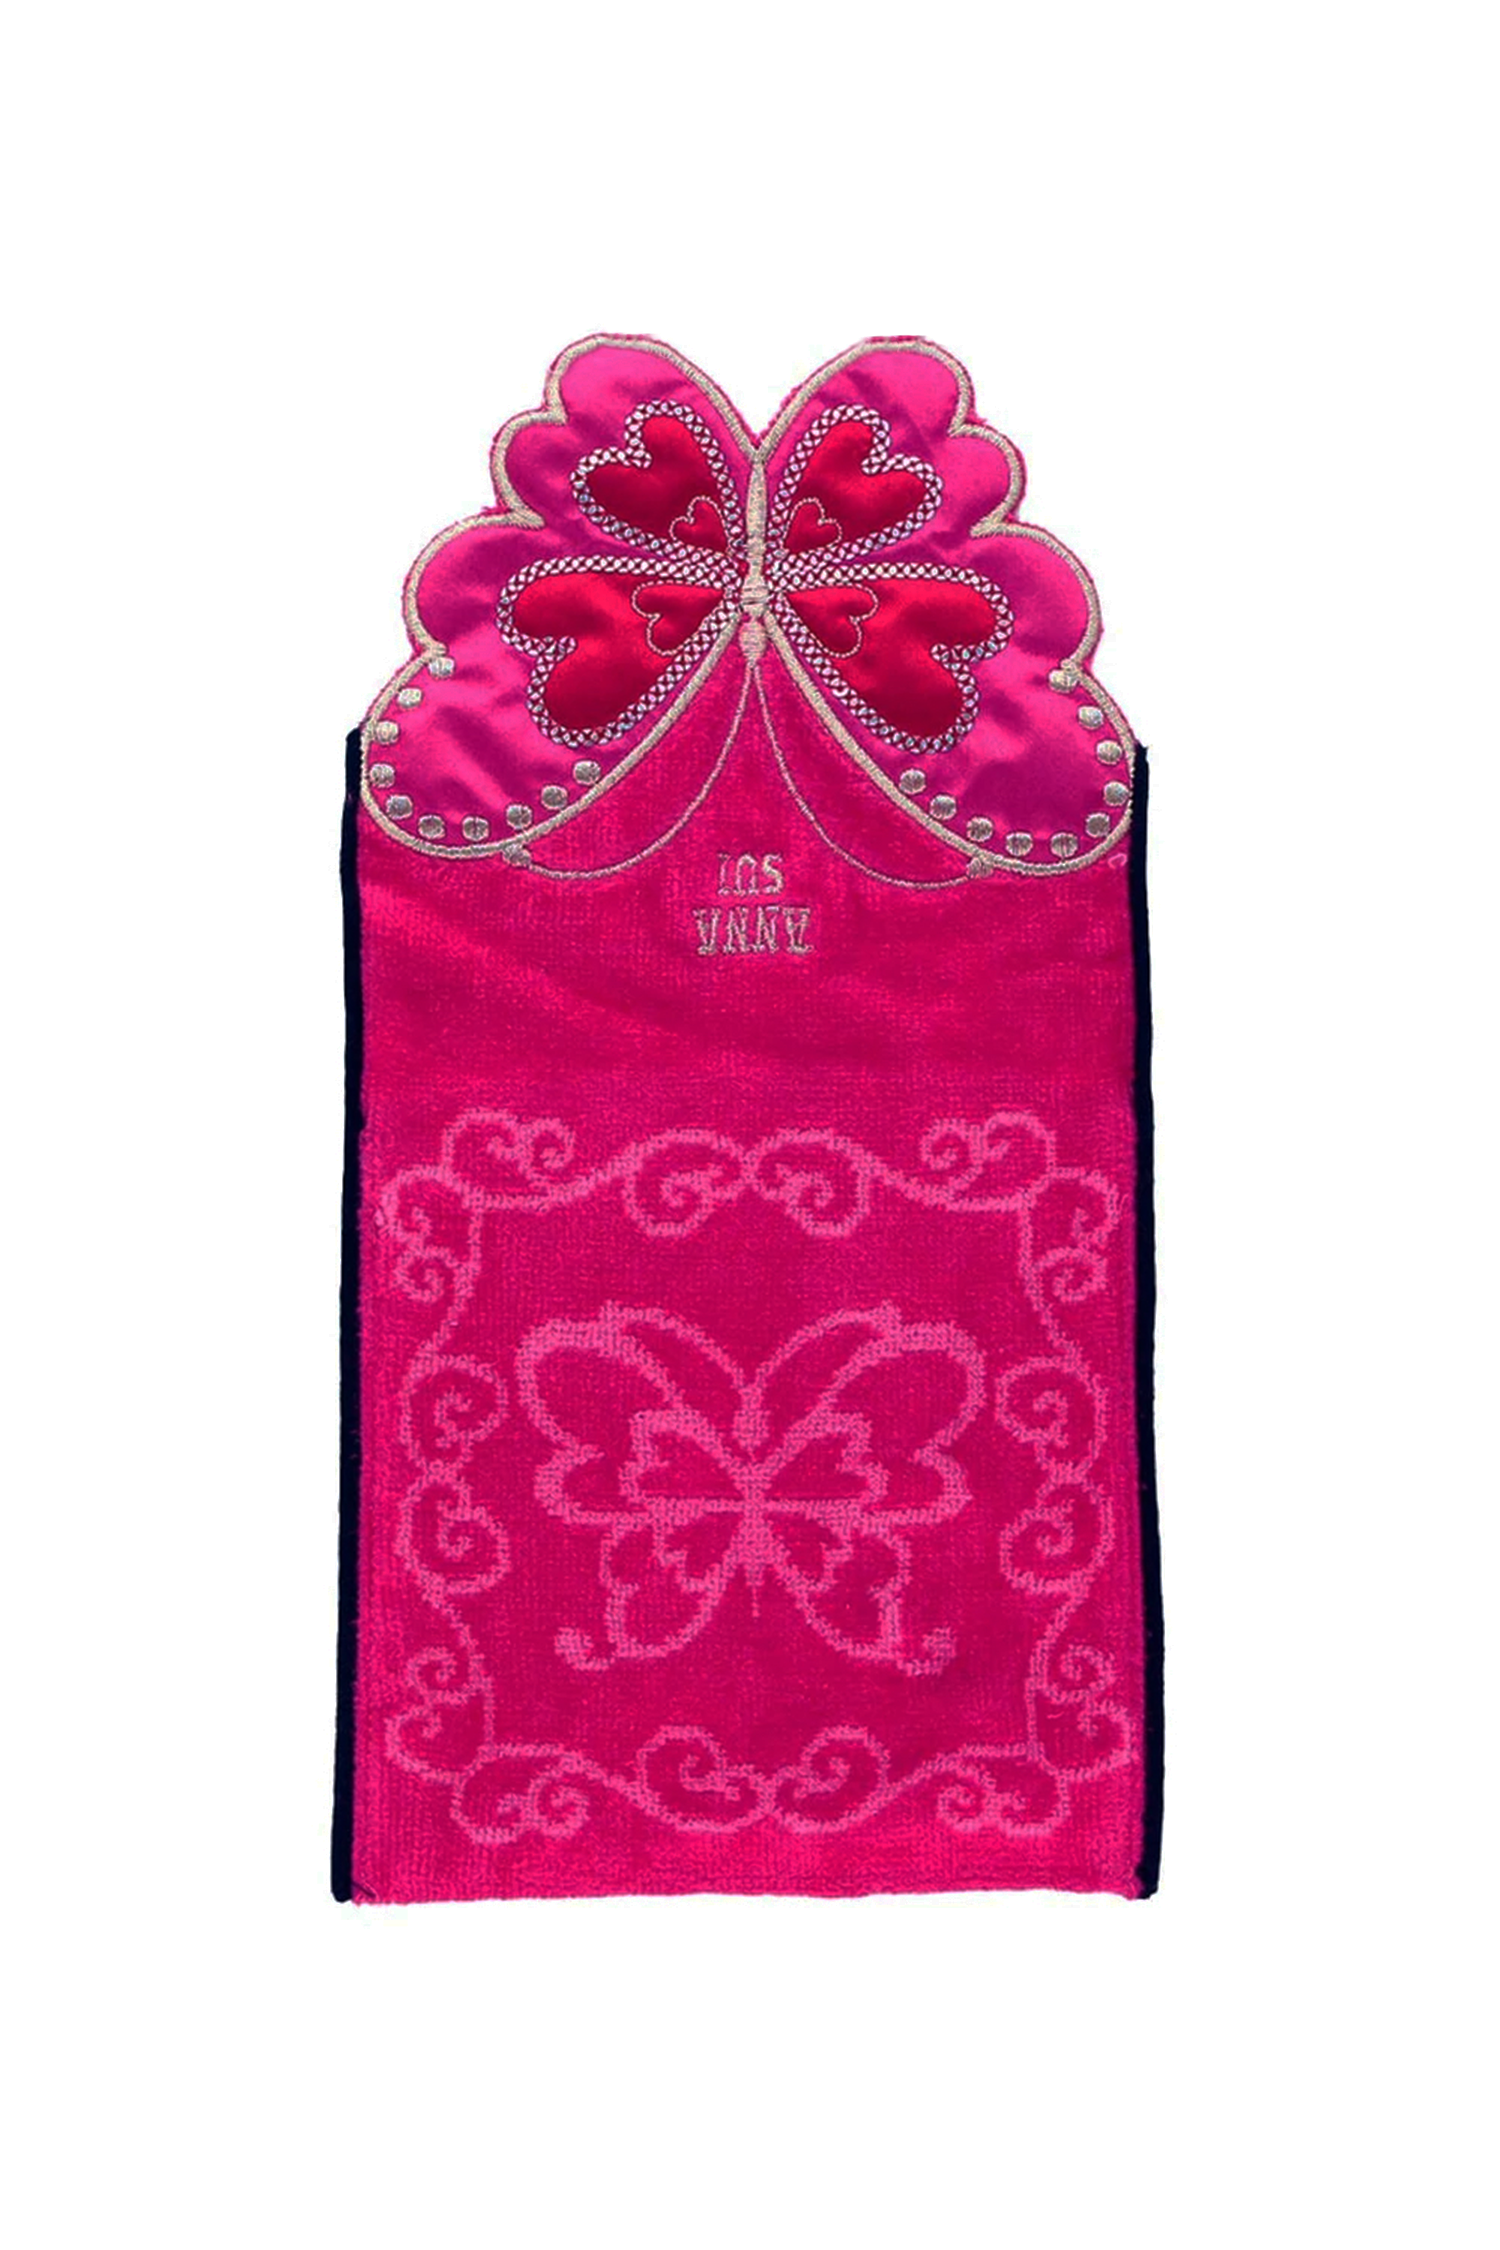 Open Red Pocket Washcloth, cut-out butterfly on a flap, Anna Sui label, pink retro butterfly in center